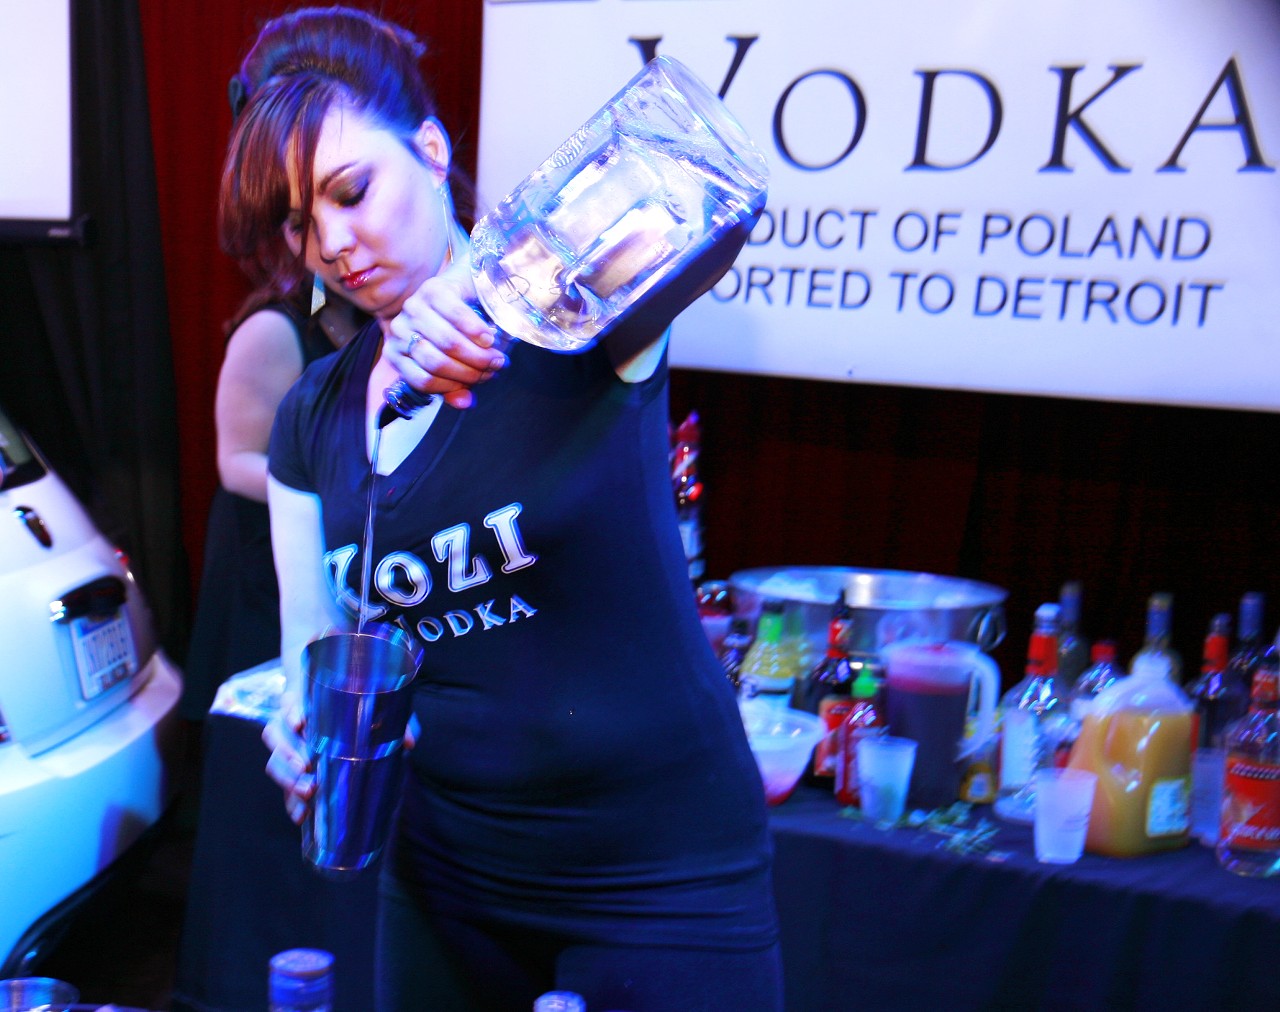 39 More Great Photos From Vodka Vodka